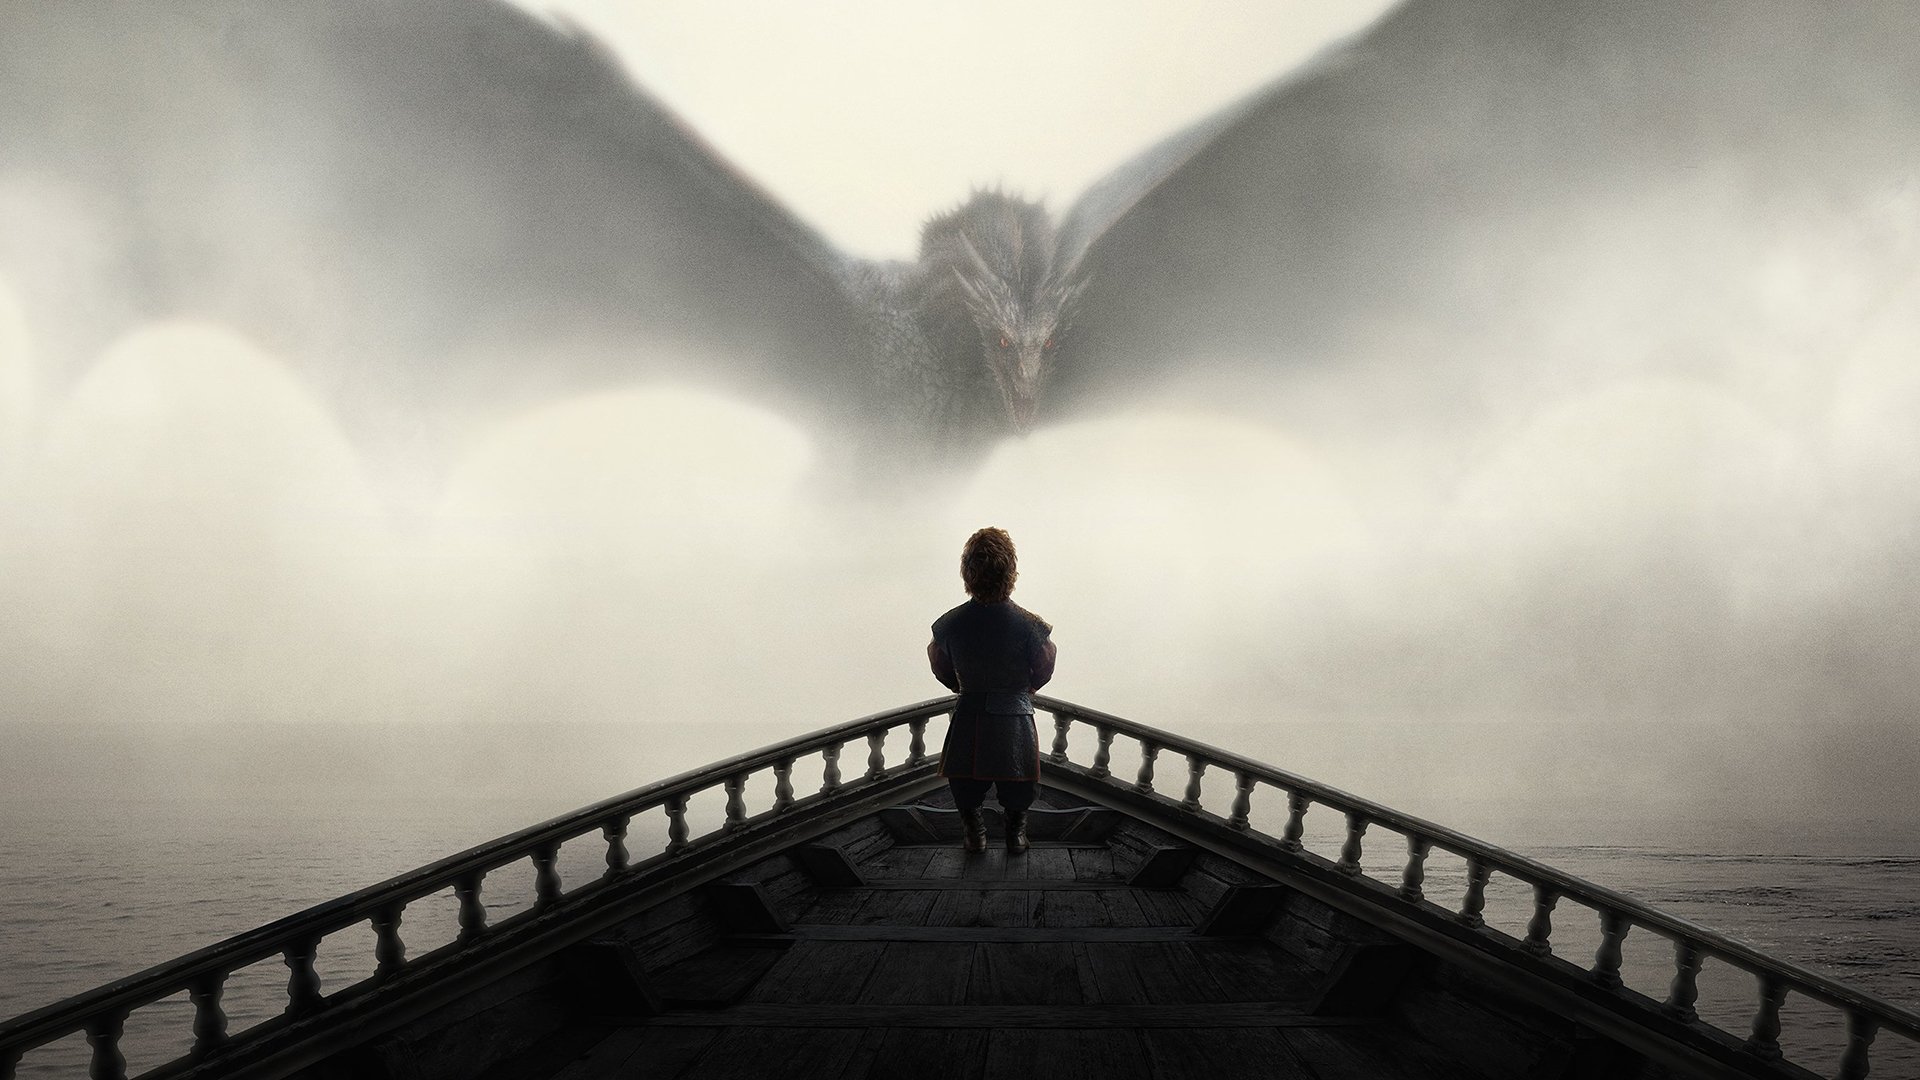  Game Of Thrones HD Wallpapers Background Images Wallpaper